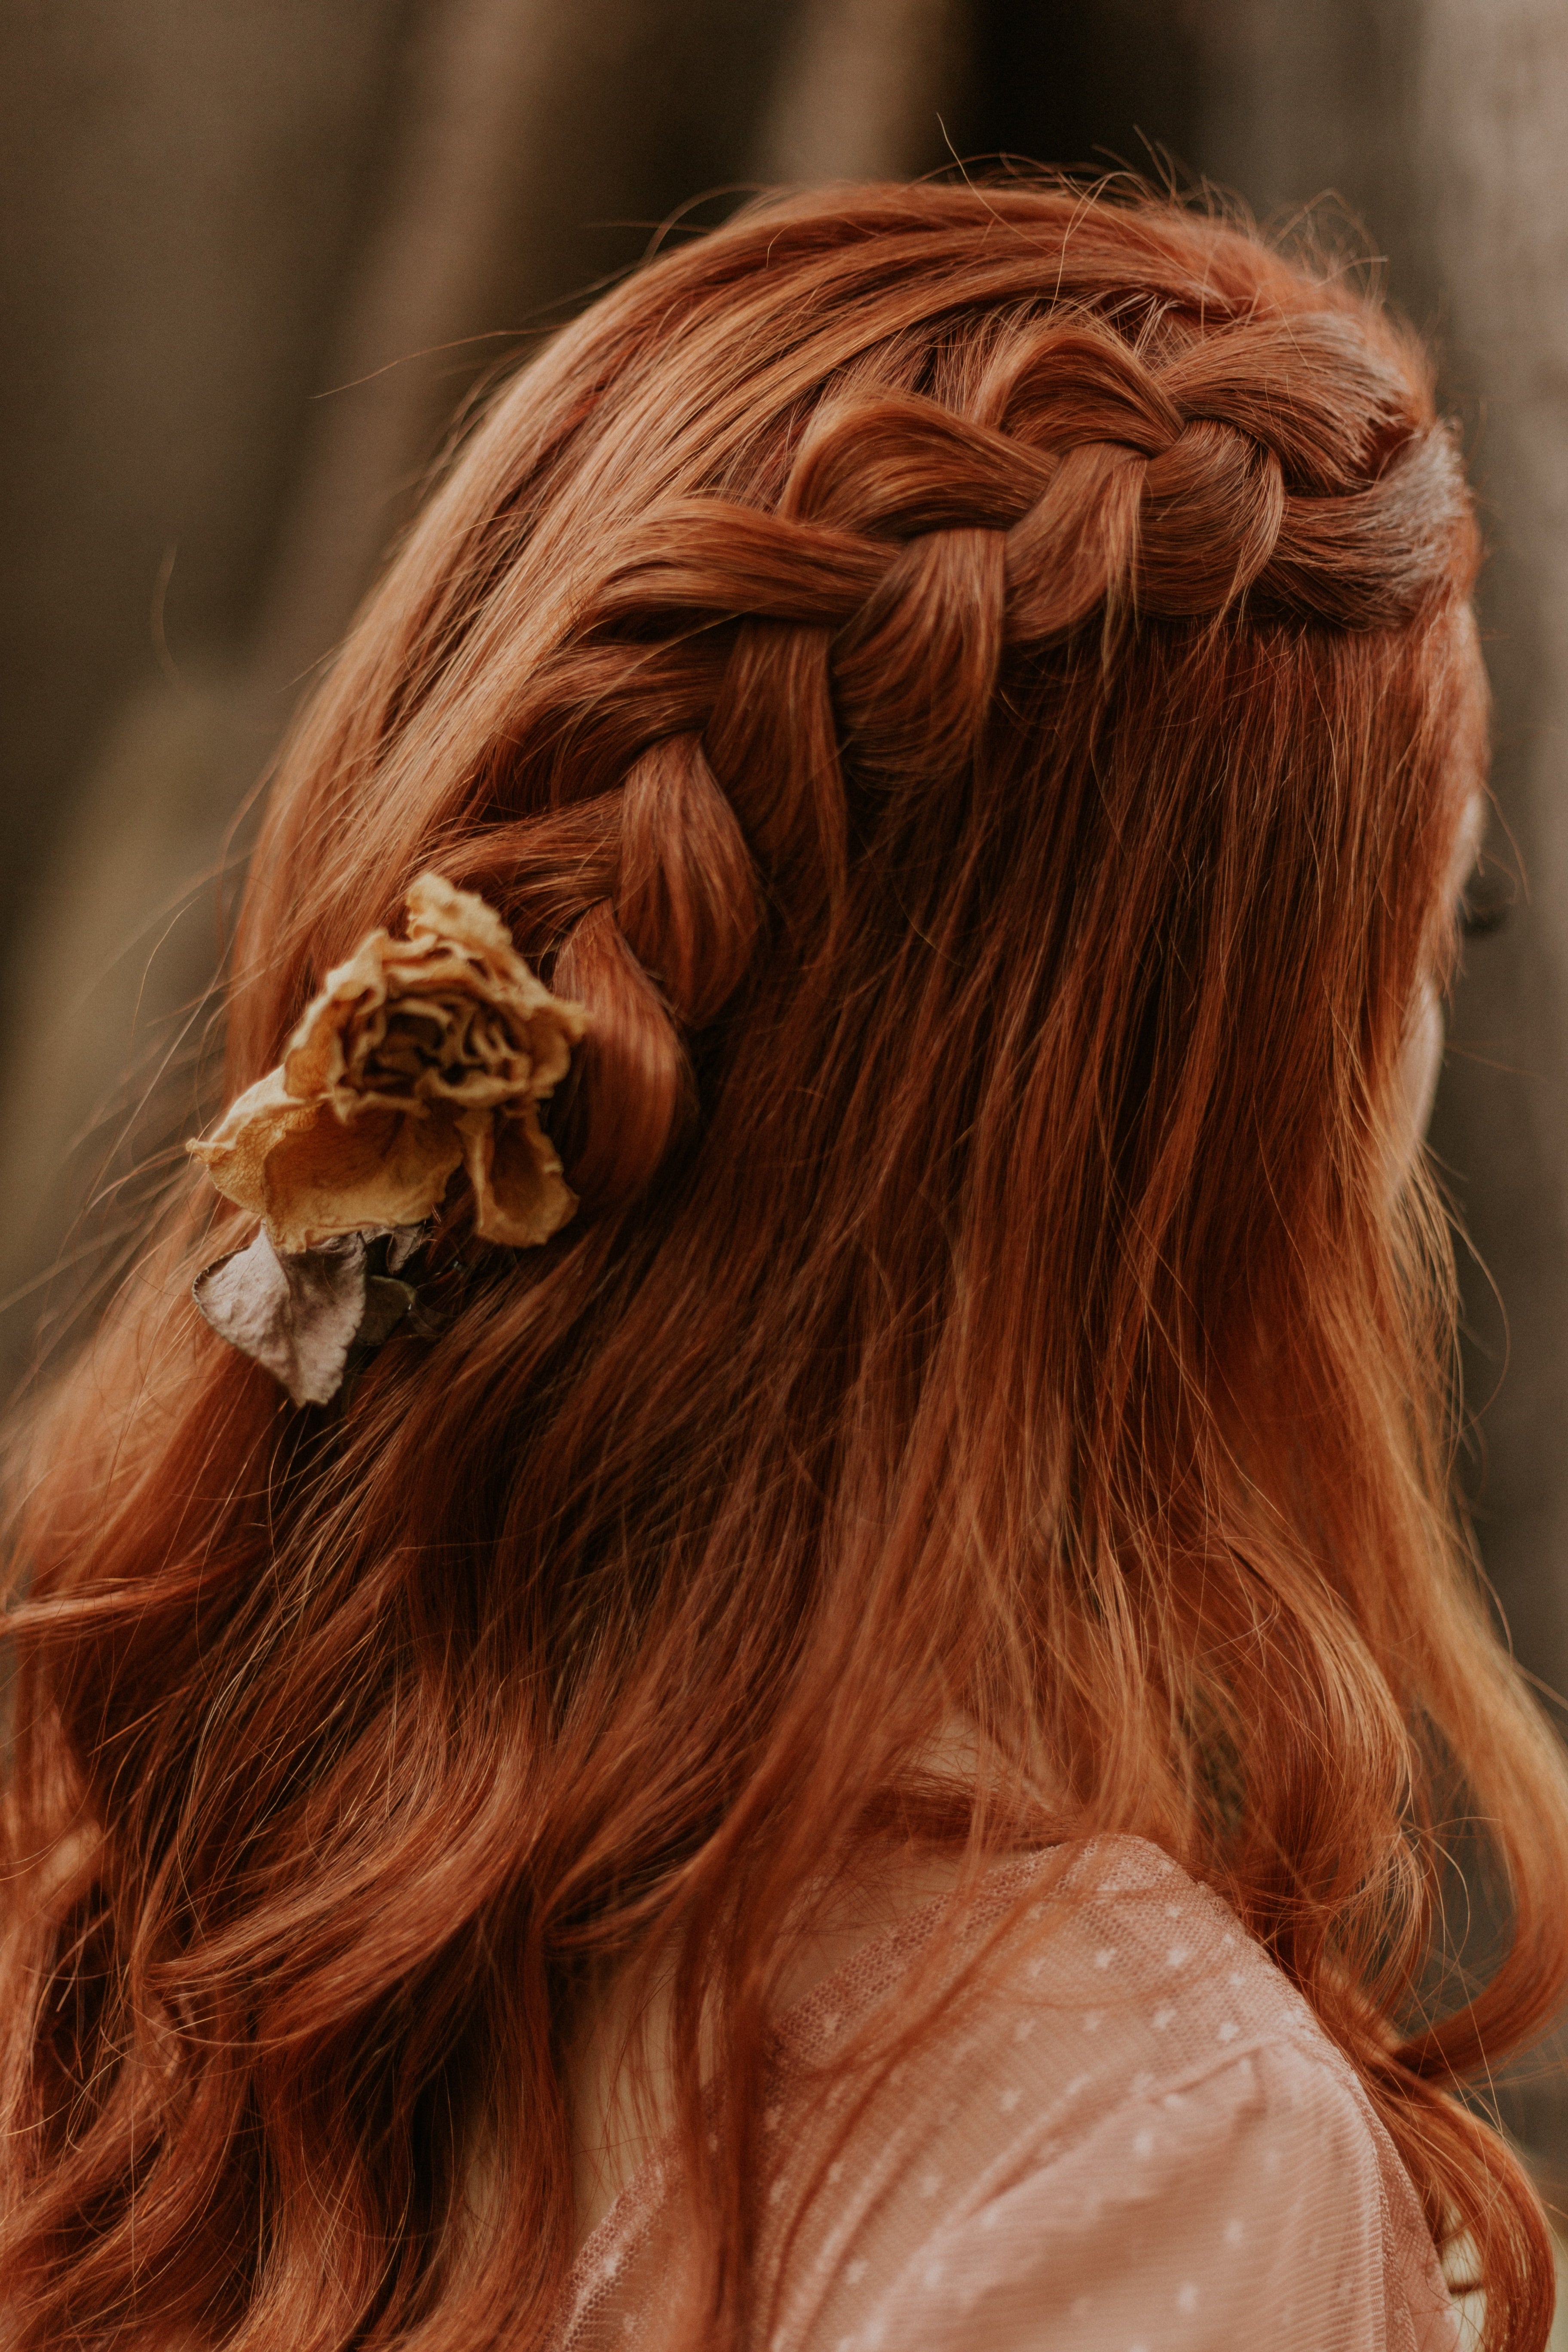 Red hair tied half in a braid and tied with a bow accessory as an idea for easy holiday hairstyles from Rocky Mountain Soap Company.  